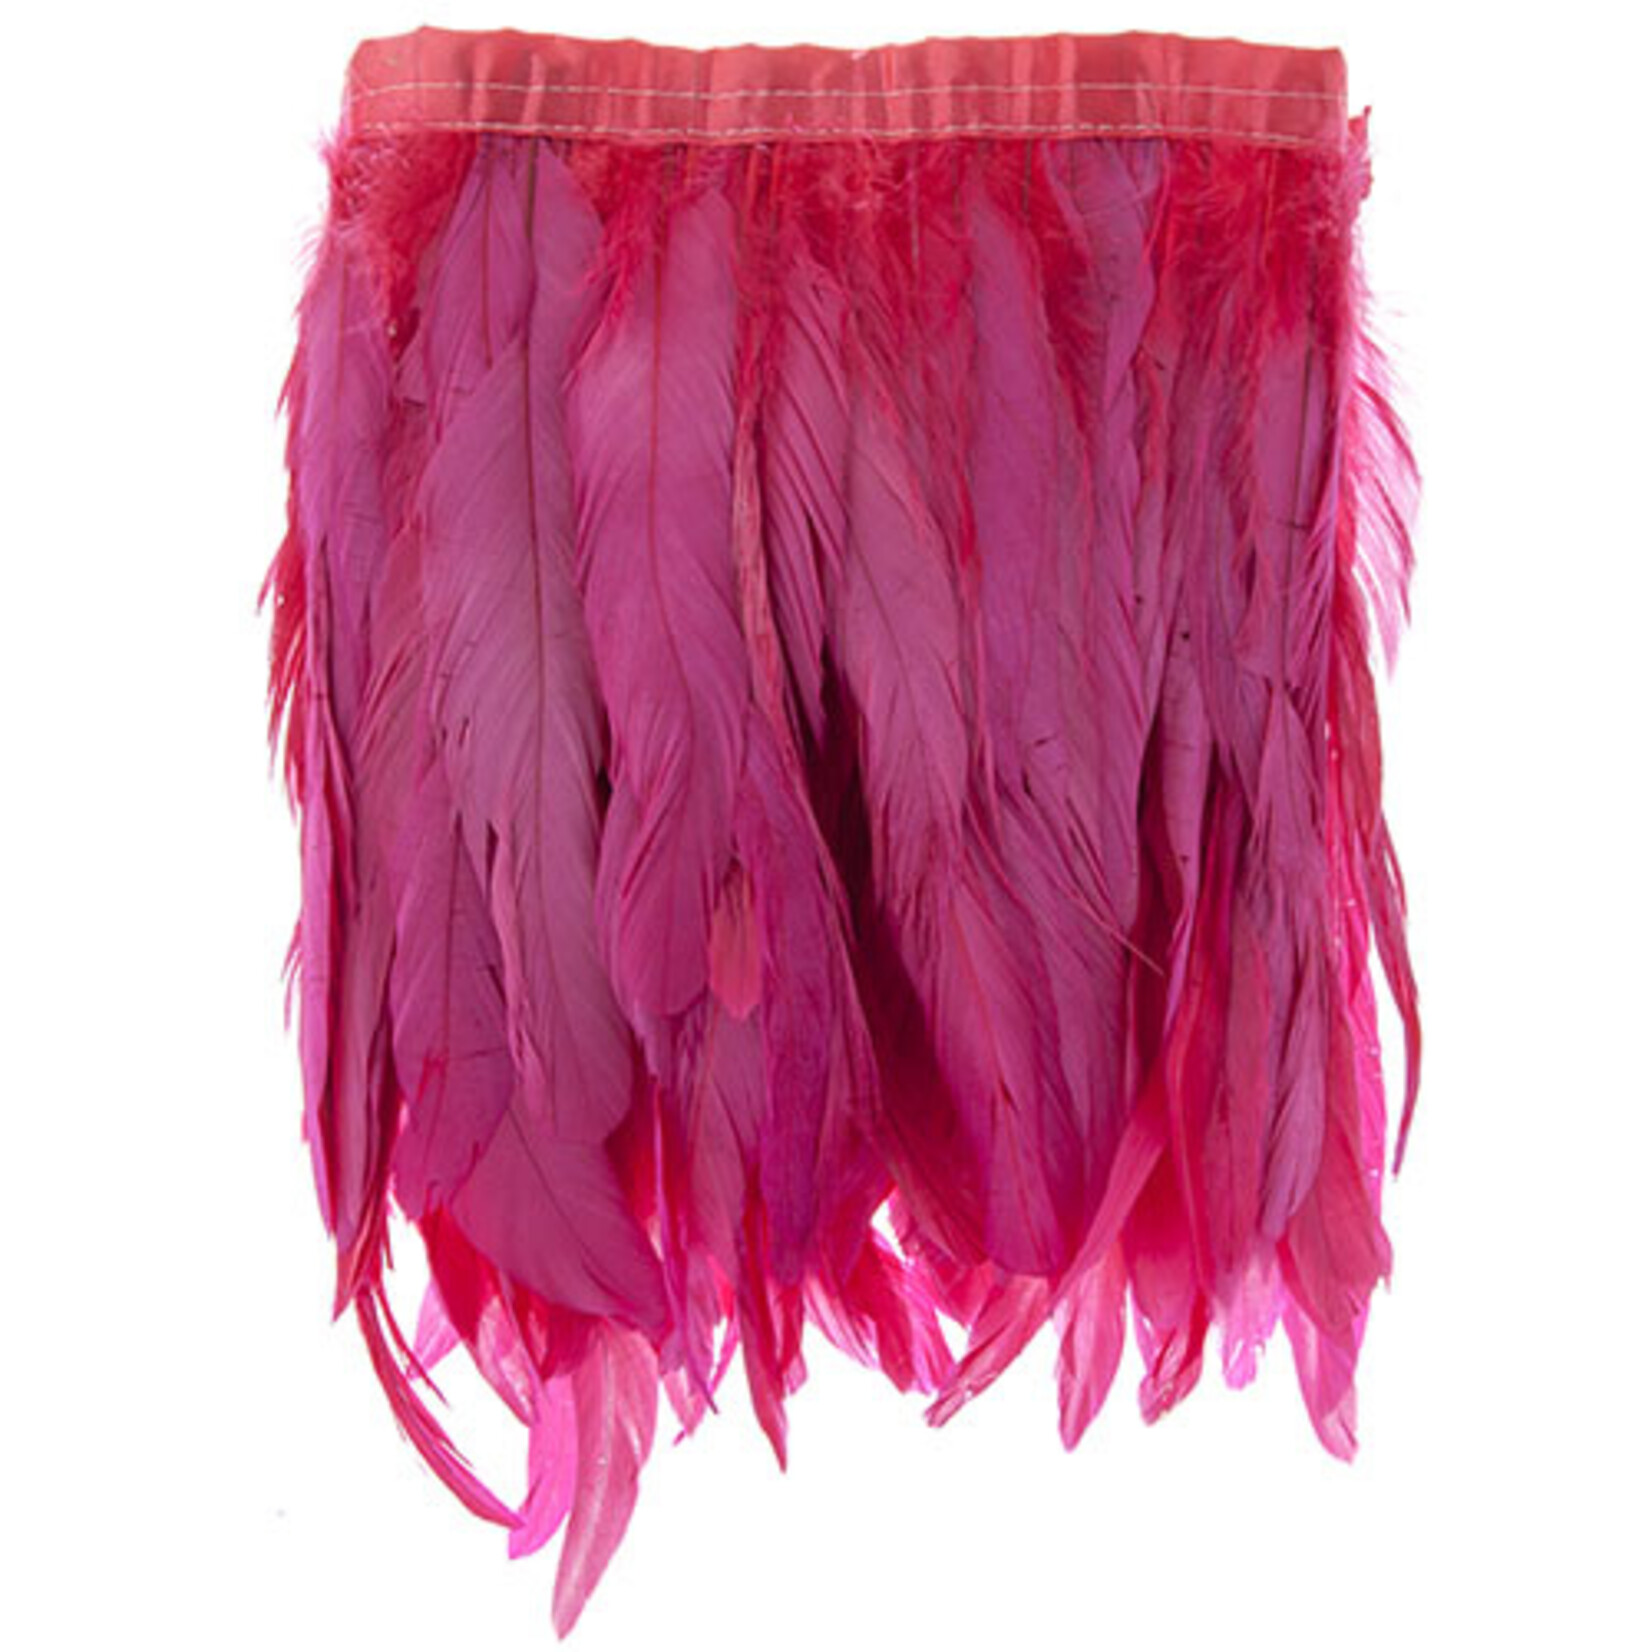 Coque Feathers Value 10-12 Inches 1 Yard  Dark Coral